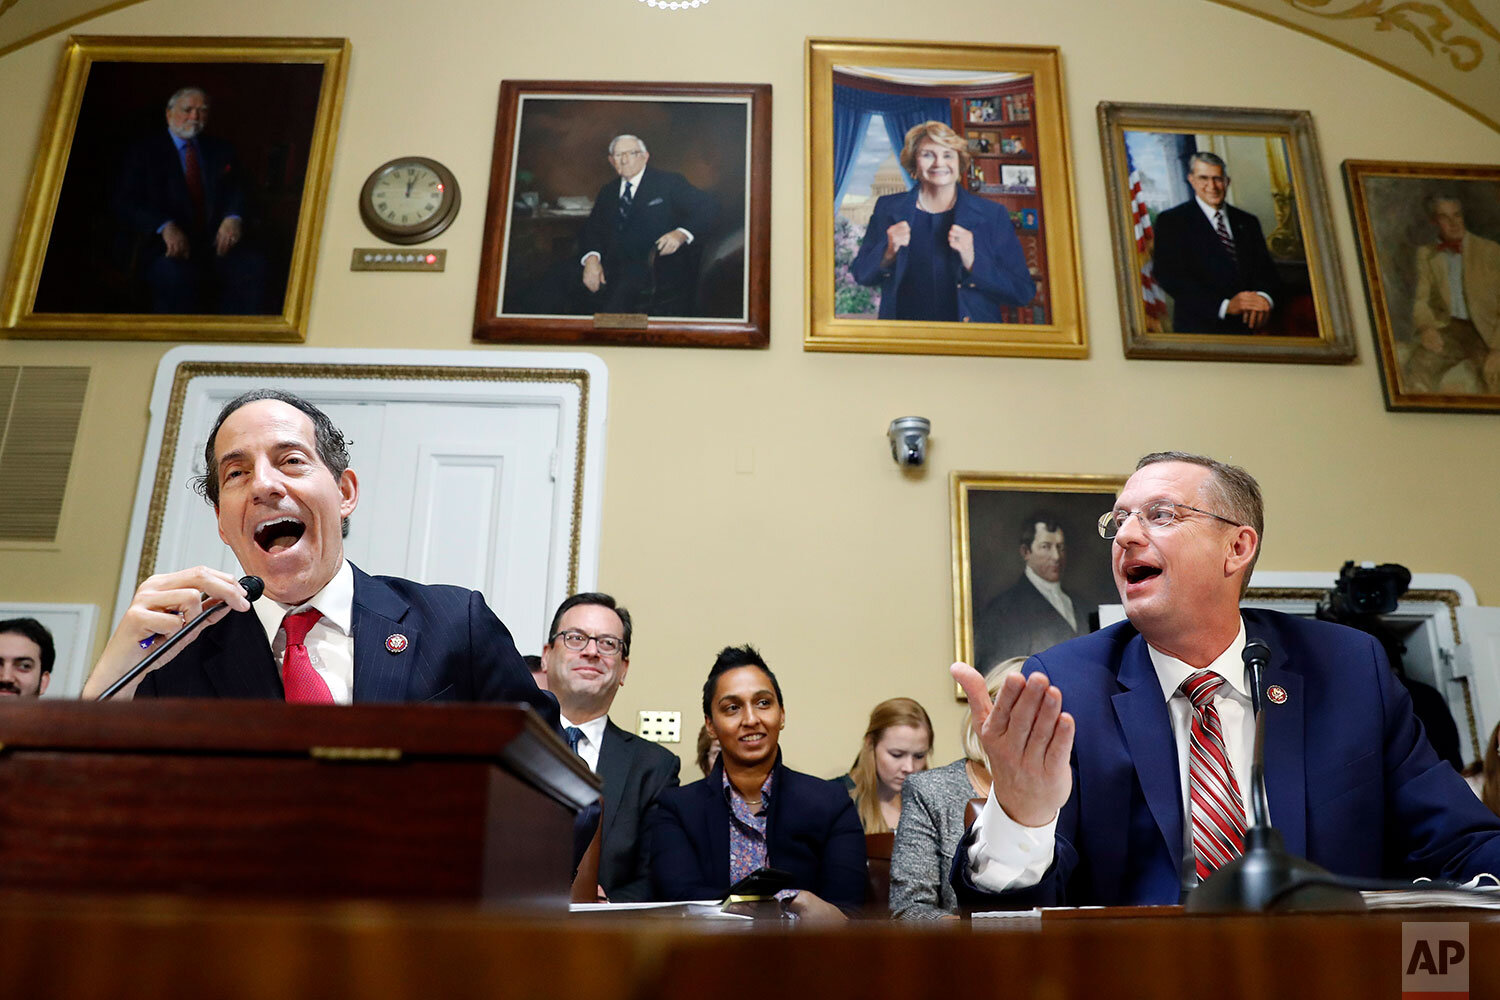  Rep. Jamie Raskin, D-Md., left, and House Judiciary Committee ranking member Rep. Doug Collins, R-Ga., speak during a House Rules Committee hearing on the impeachment against President Donald Trump, Tuesday, Dec. 17, 2019, on Capitol Hill in Washing